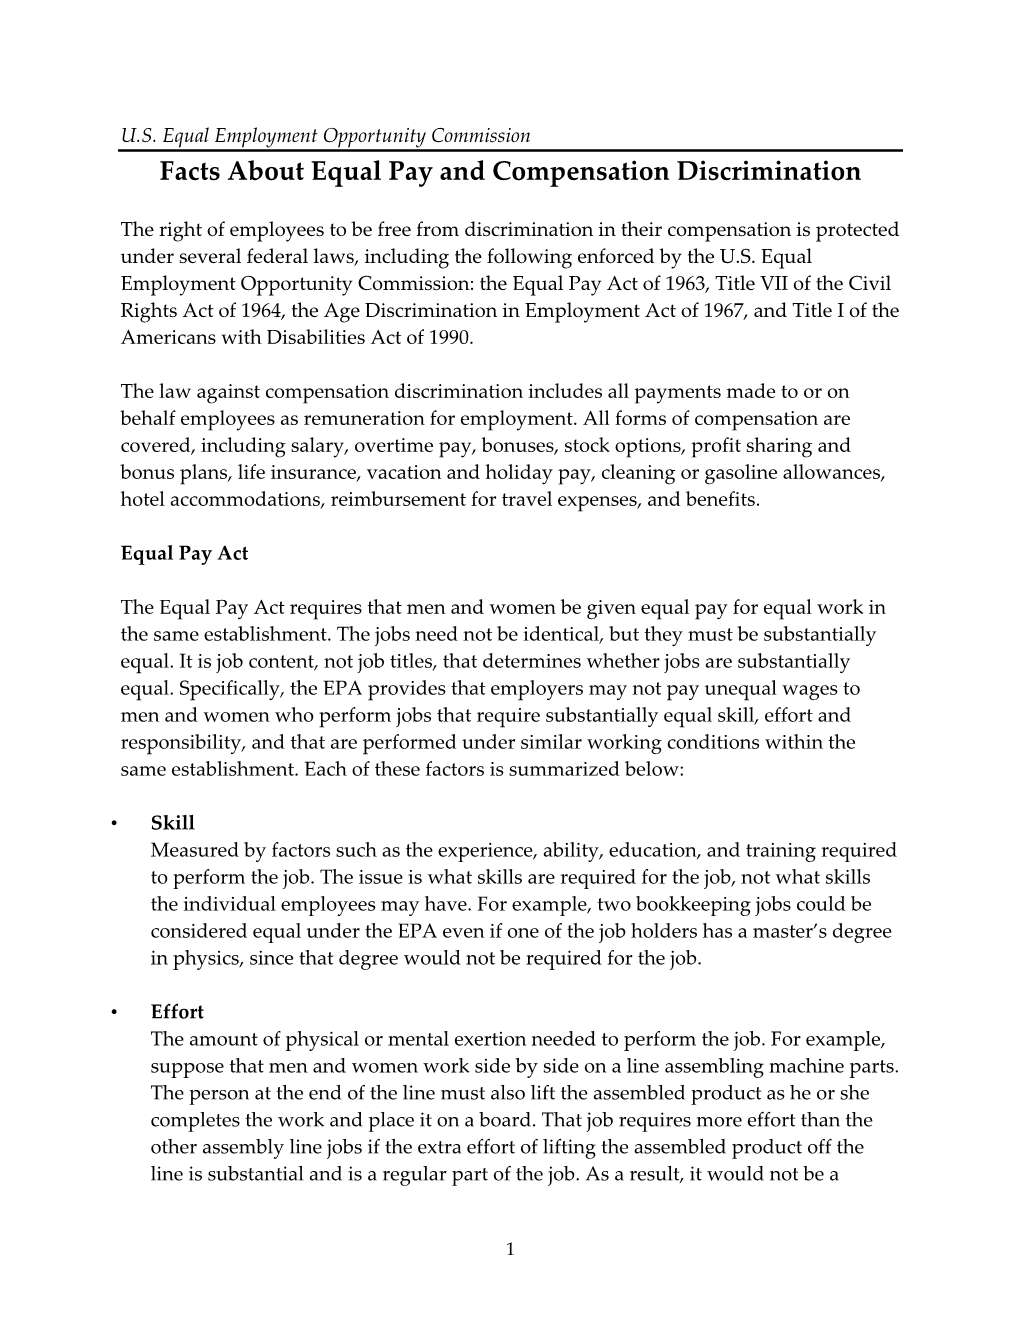 Facts About Equal Pay and Compensation Discrimination